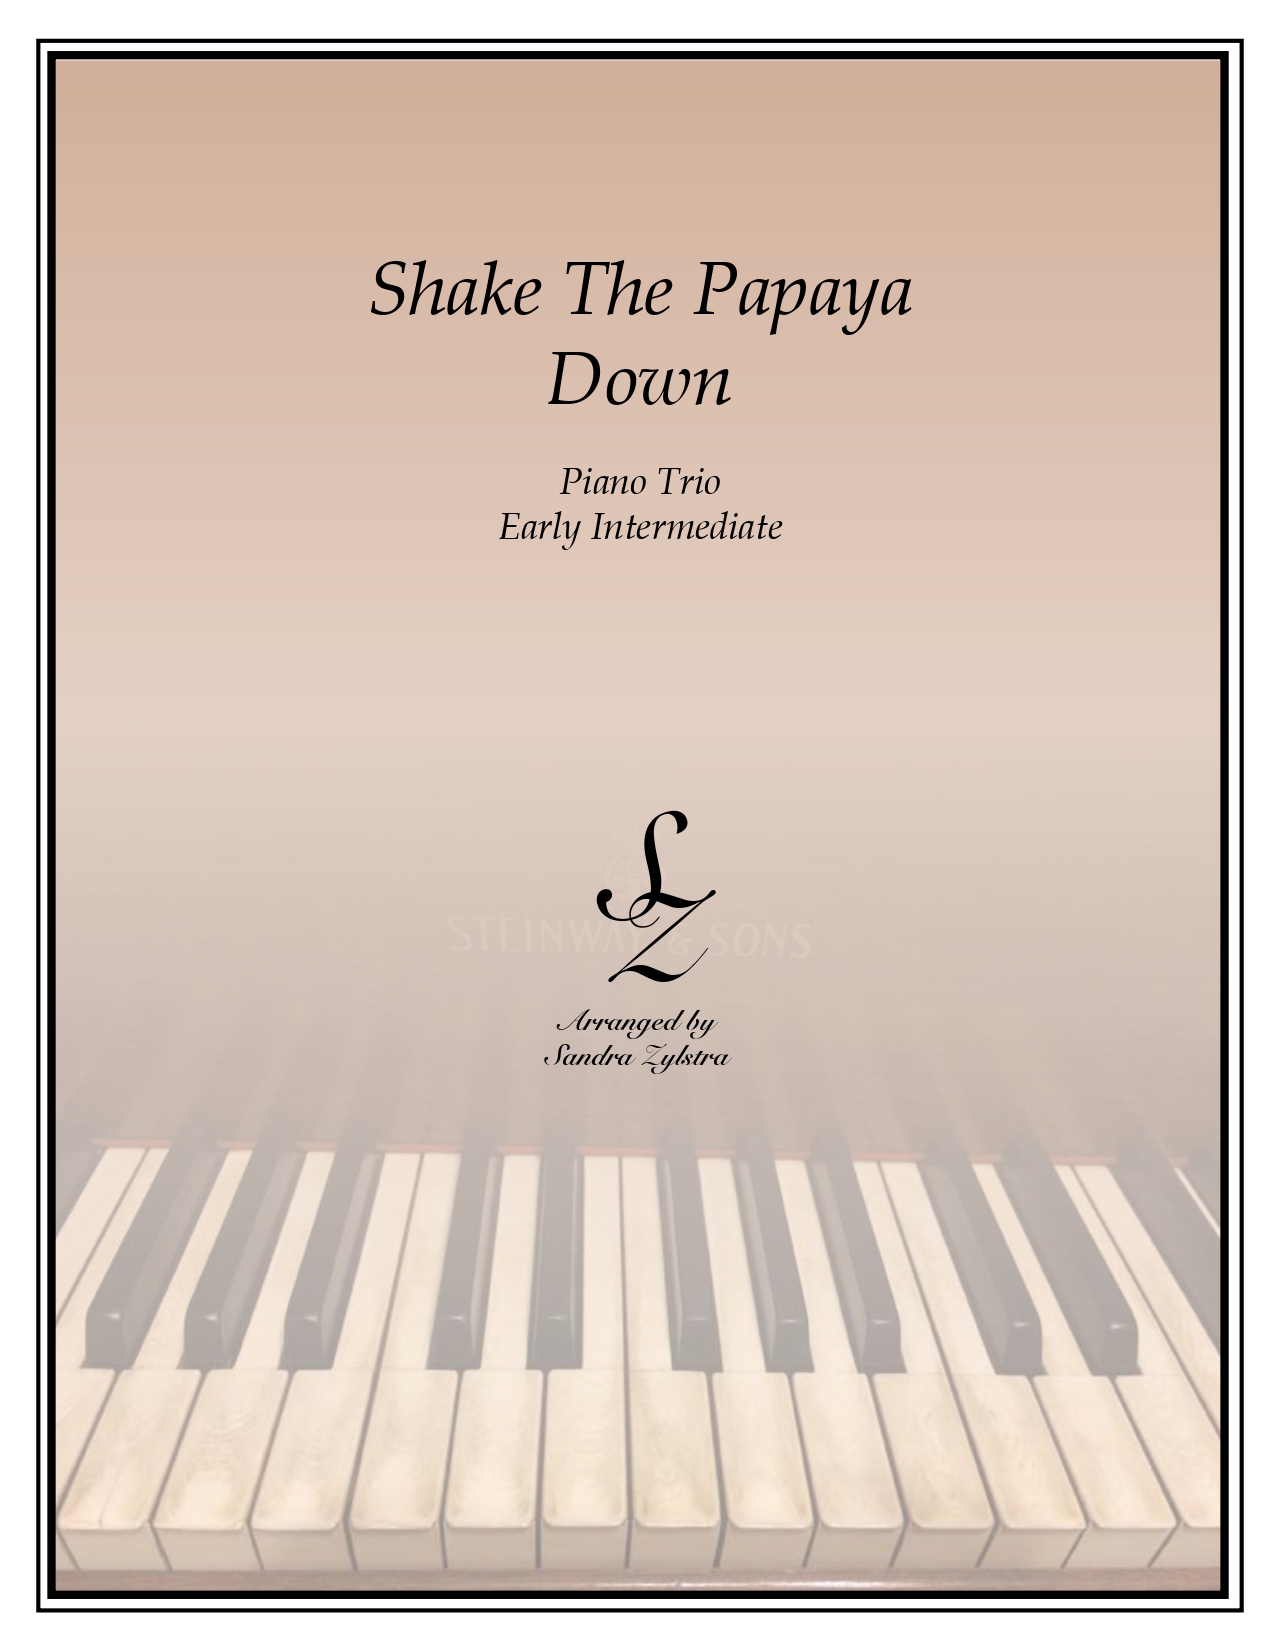 Shake The Papaya Down early intermediate piano trio parts cover page 00011